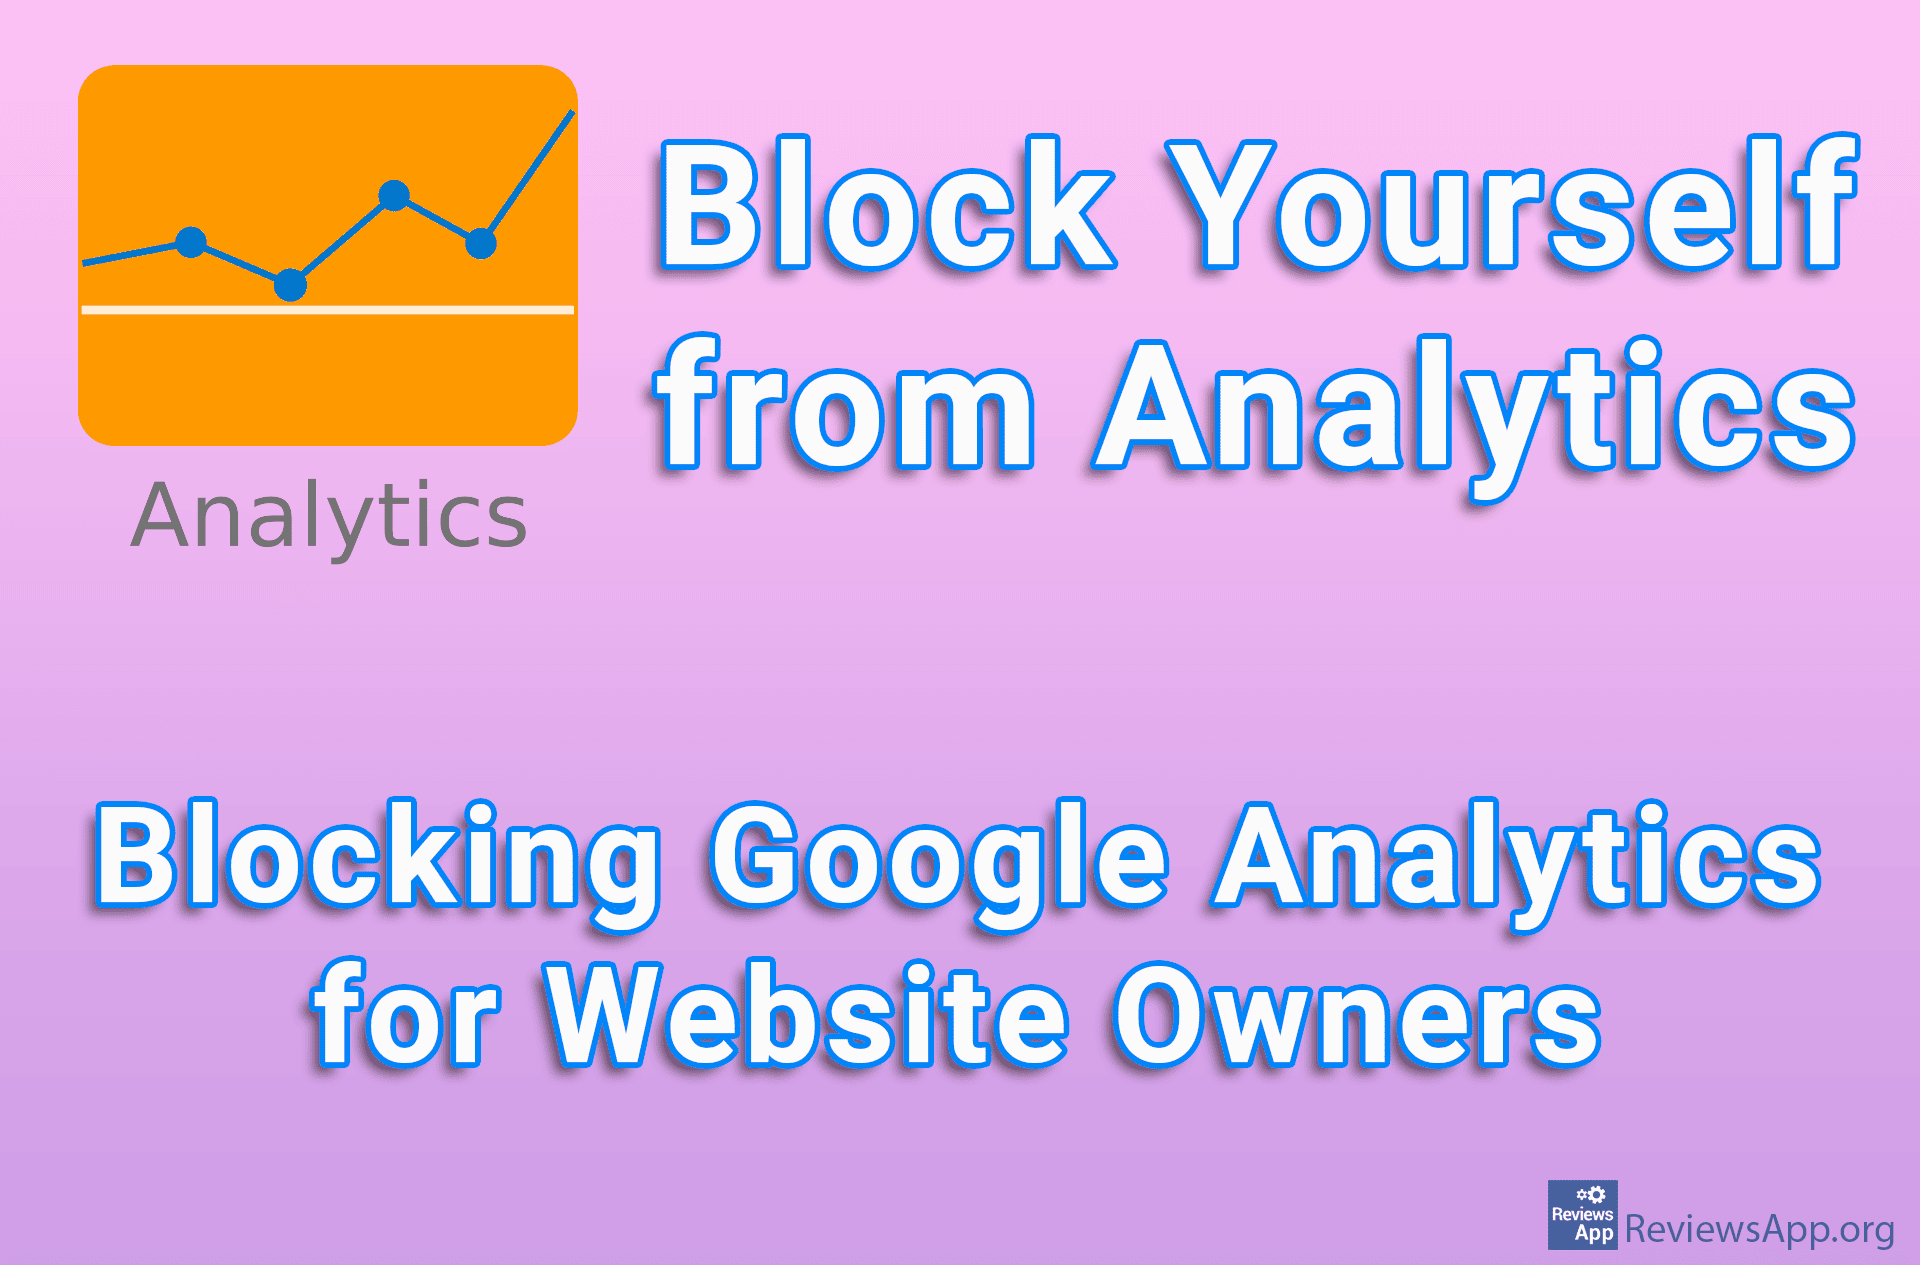 Block Yourself from Analytics – Blocking Google Analytics for Website Owners